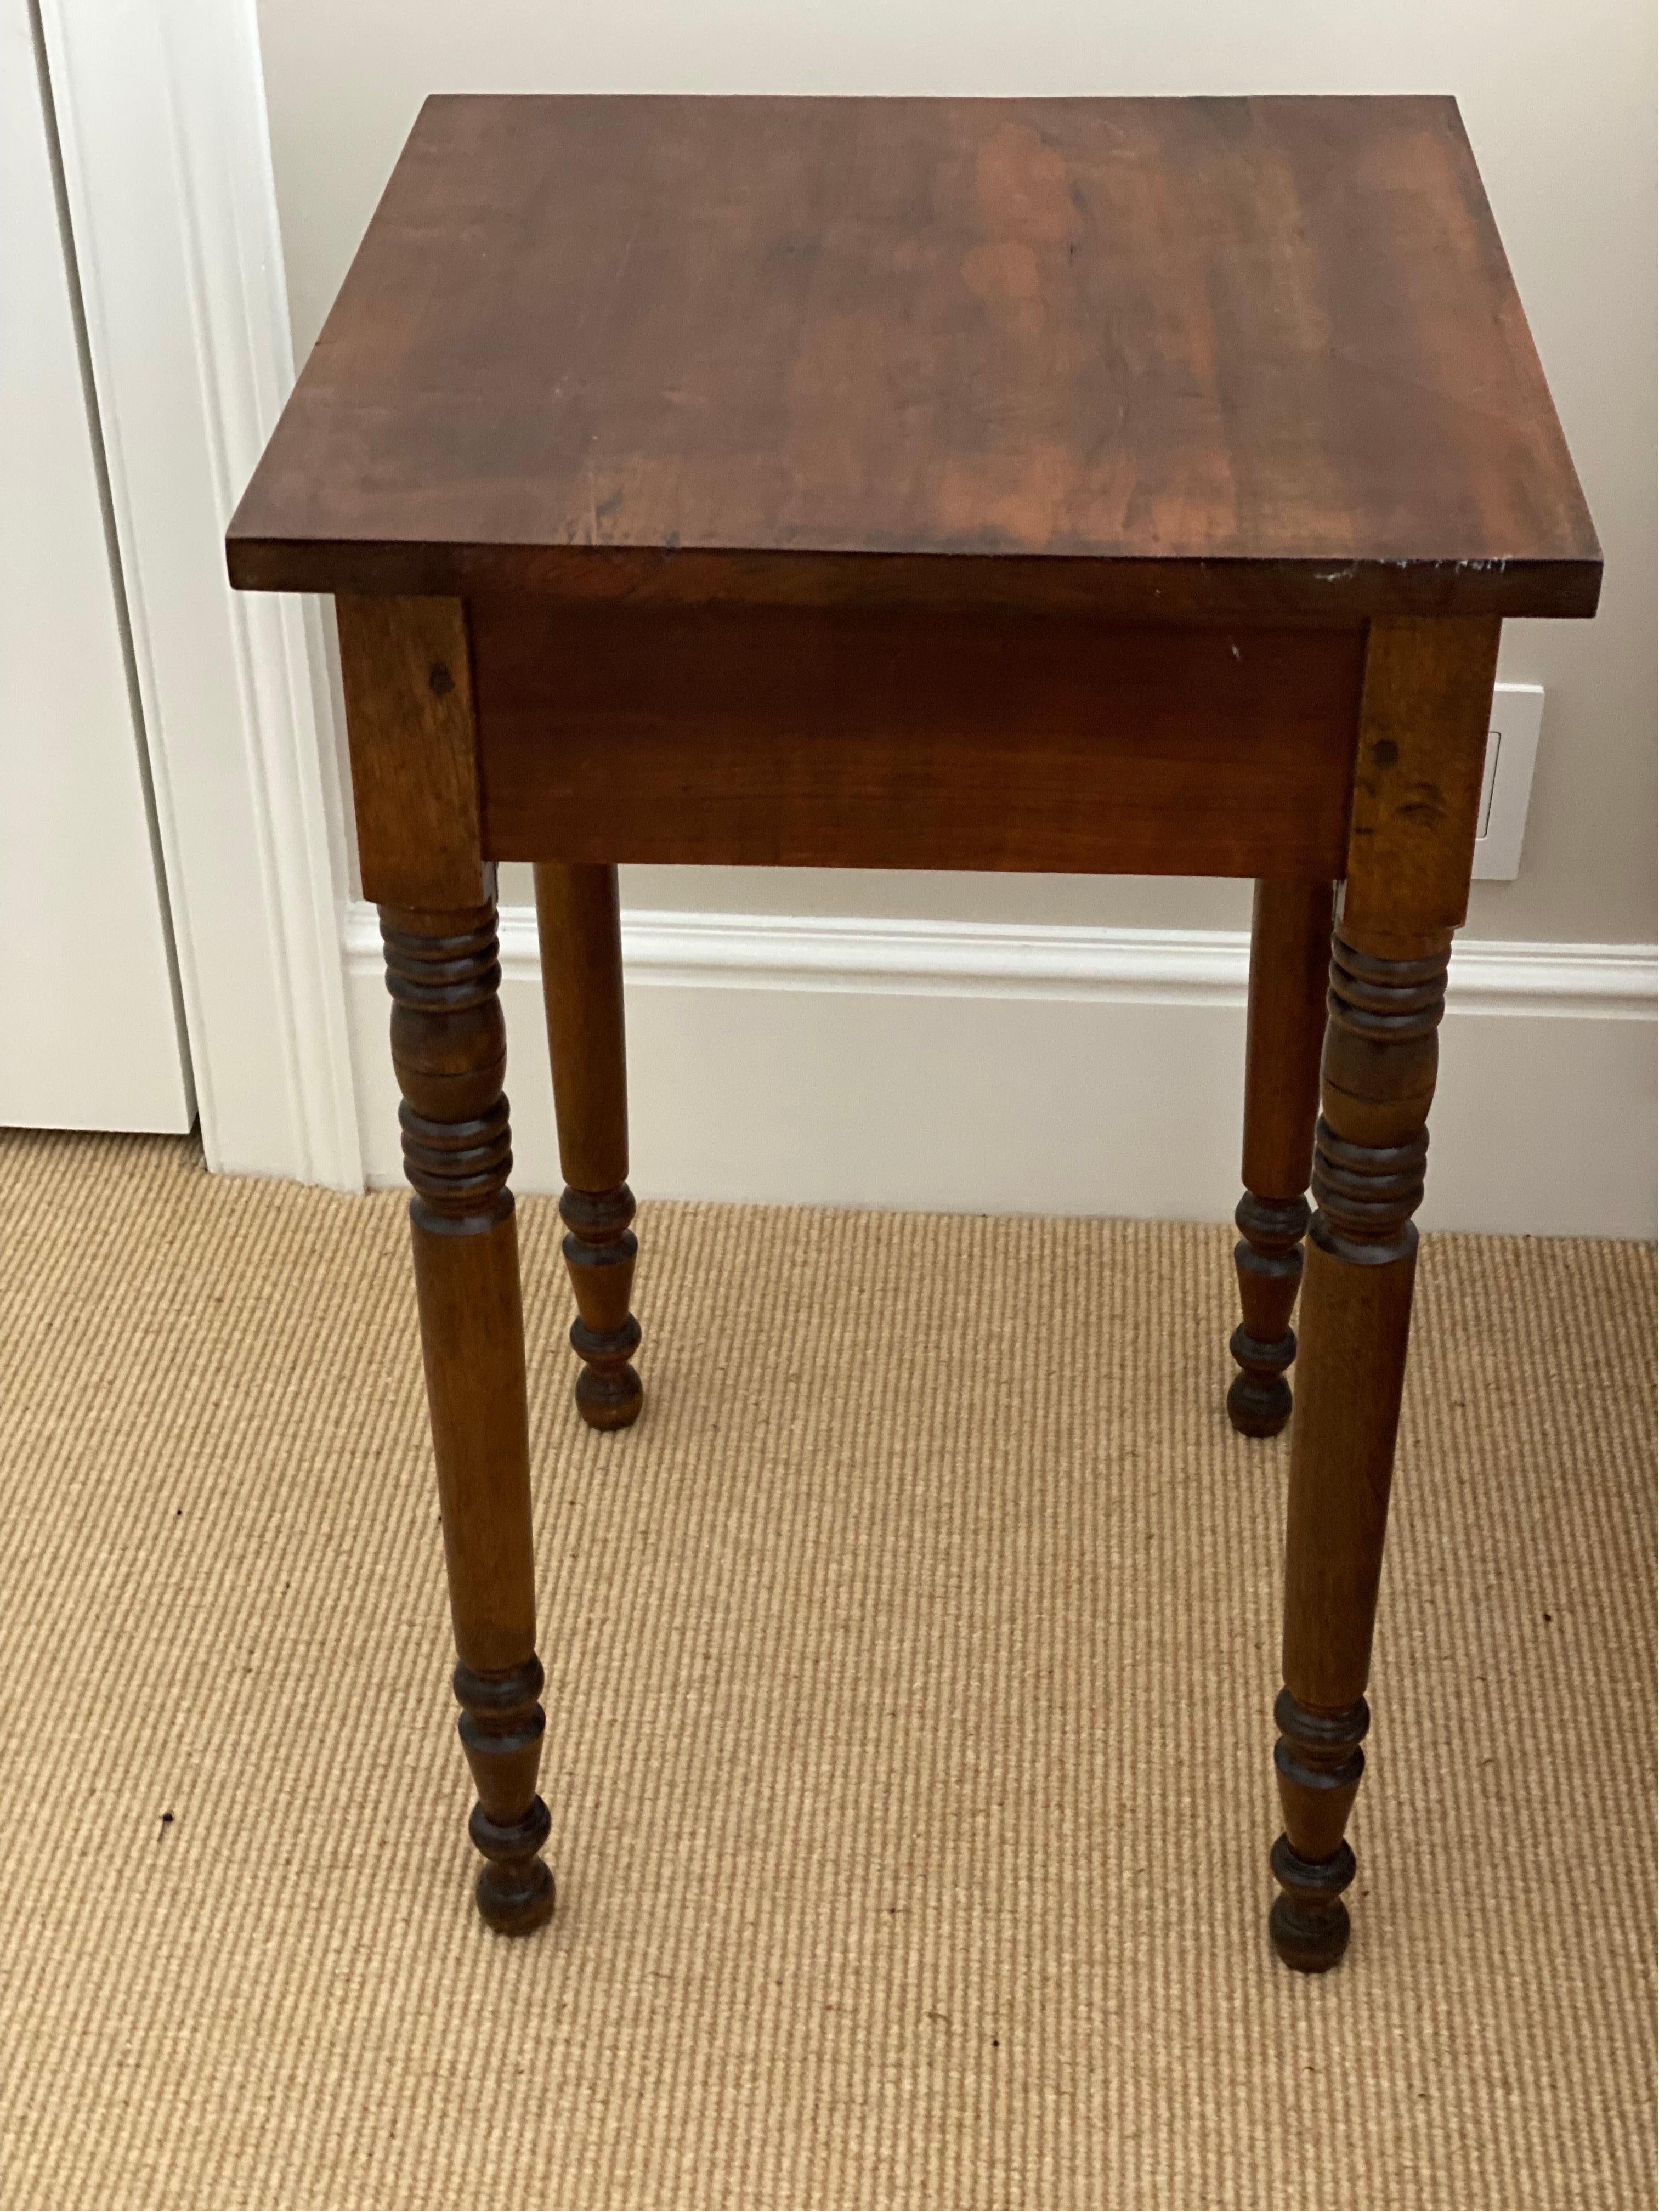 American Sheraton single drawer maple stand, 19th century.
A single drawer stand made of maple with finely turned legs ending on bun feet and a porcelain knob. General wear, good overall condition.

Measures: 18